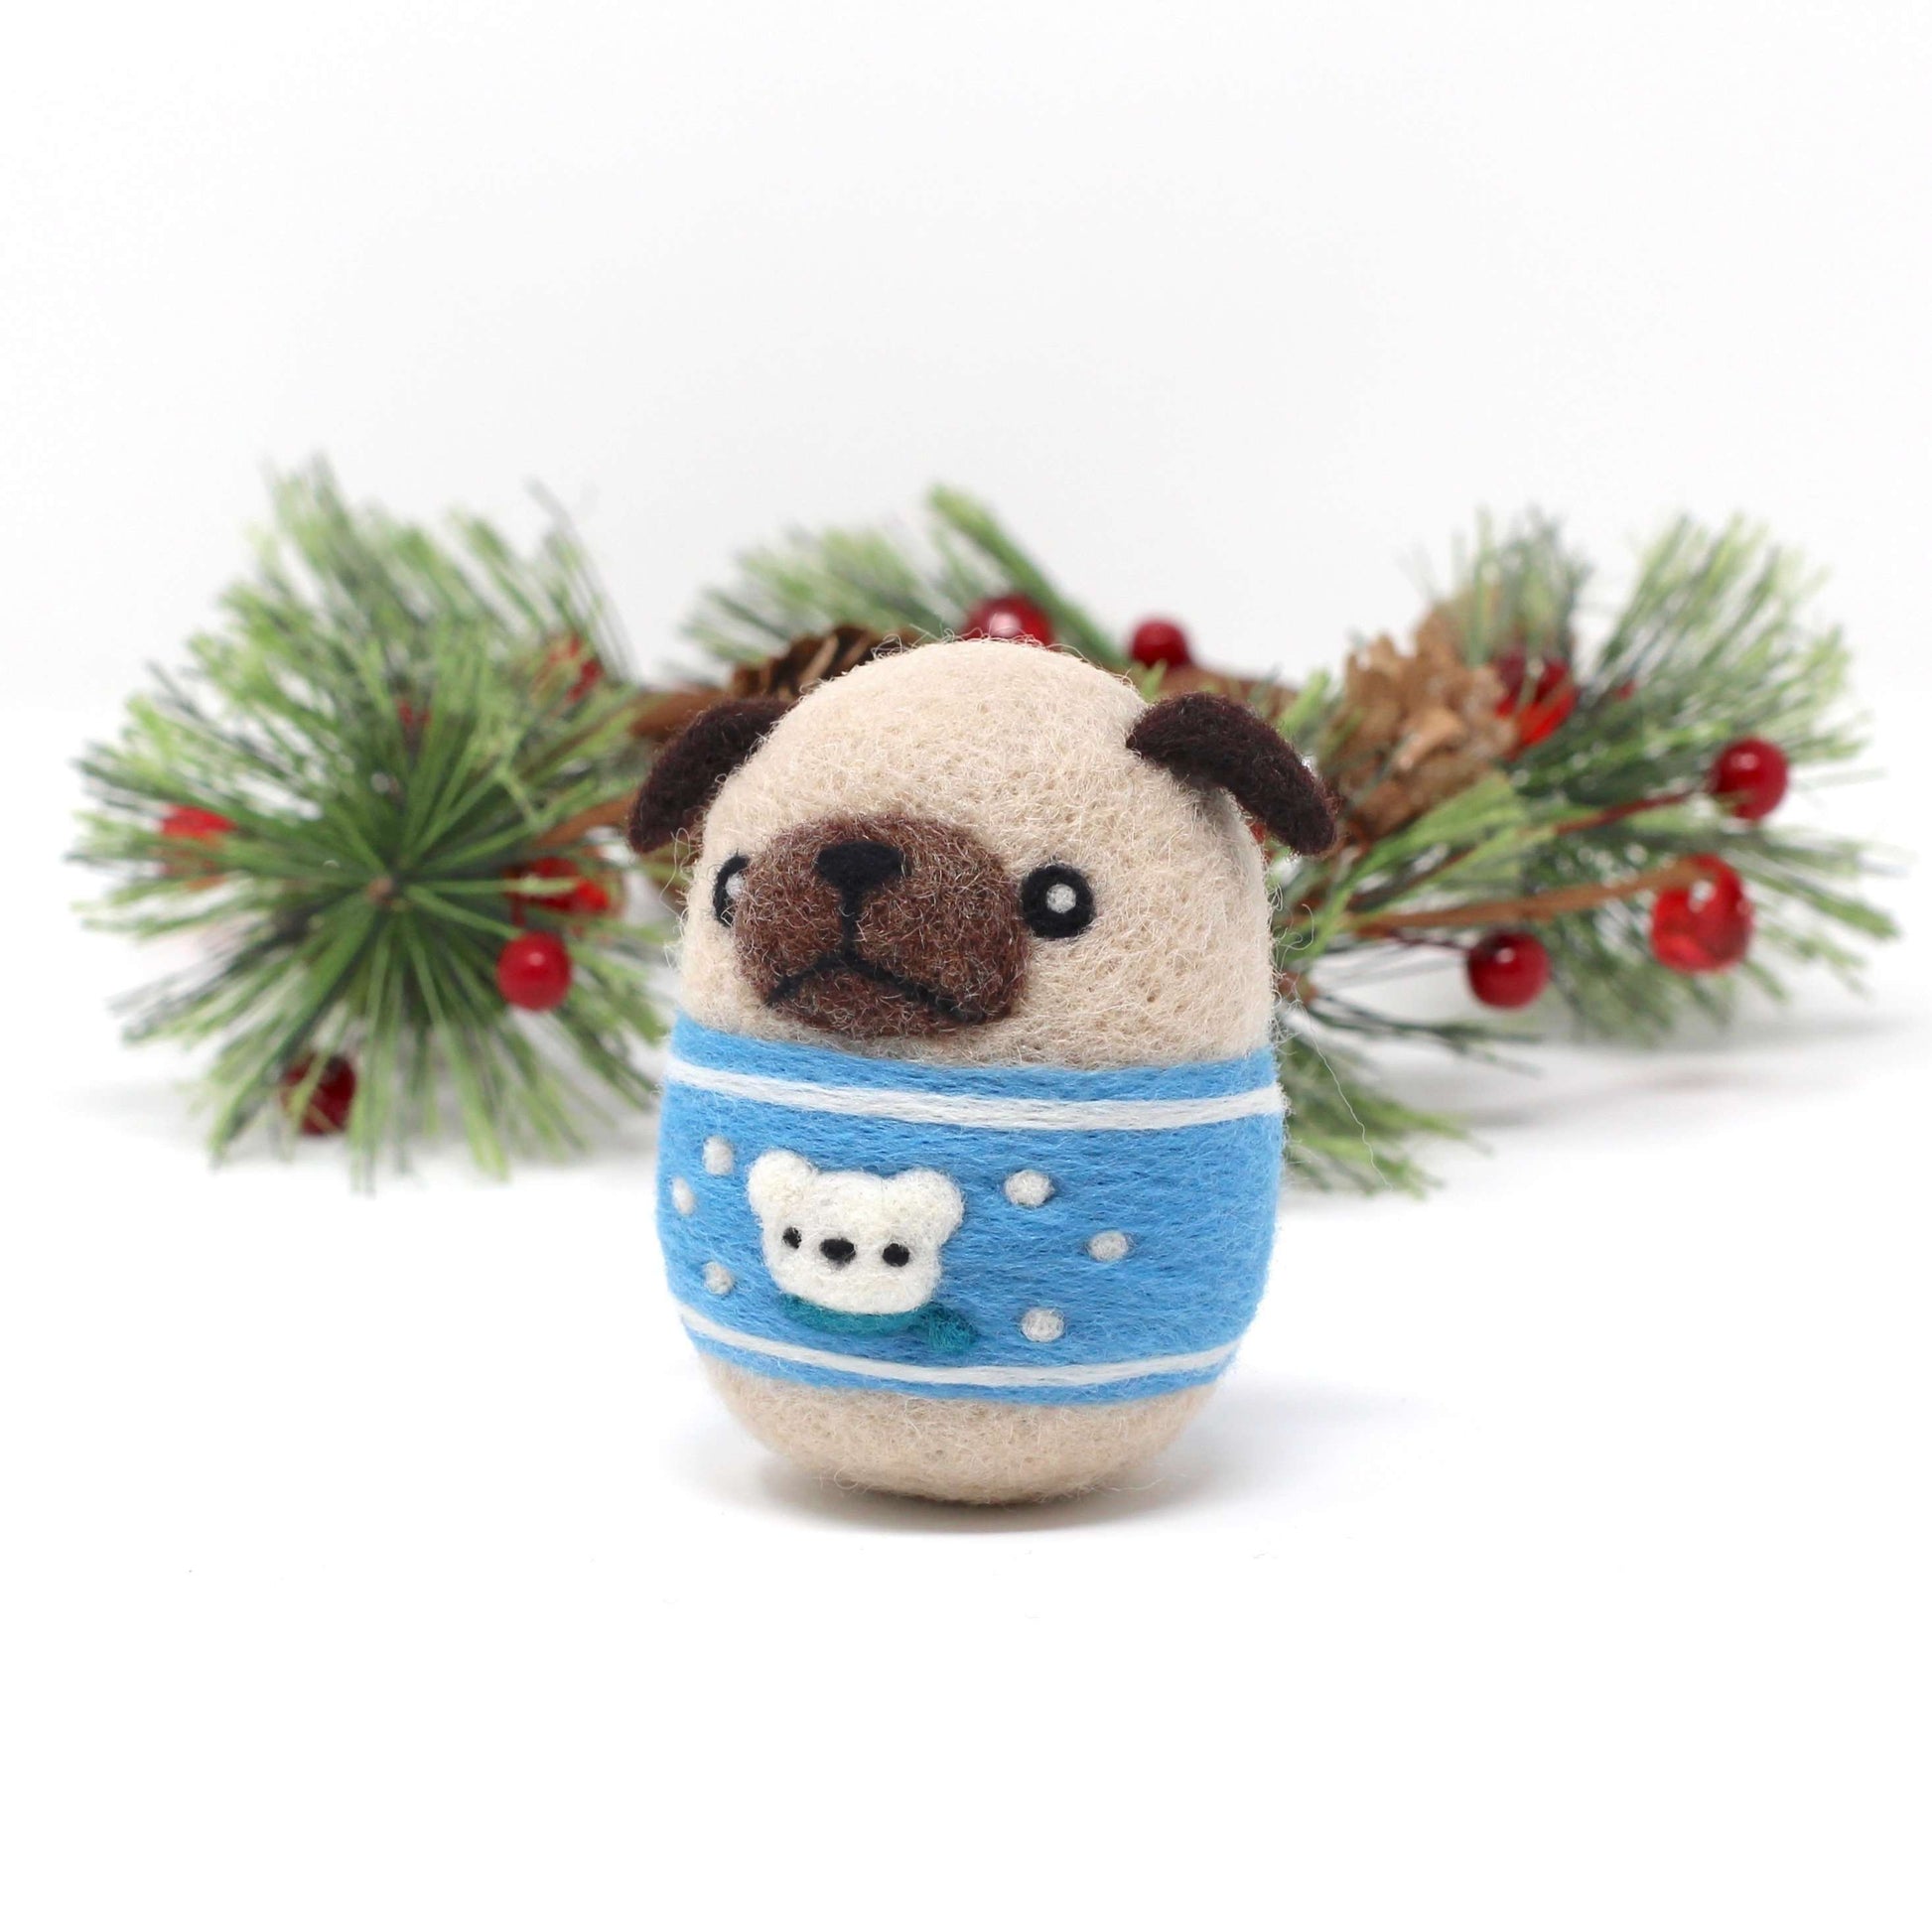 Needle Felted Pug in Blue Polar Bear Christmas Sweater by Wild Whimsy Woolies